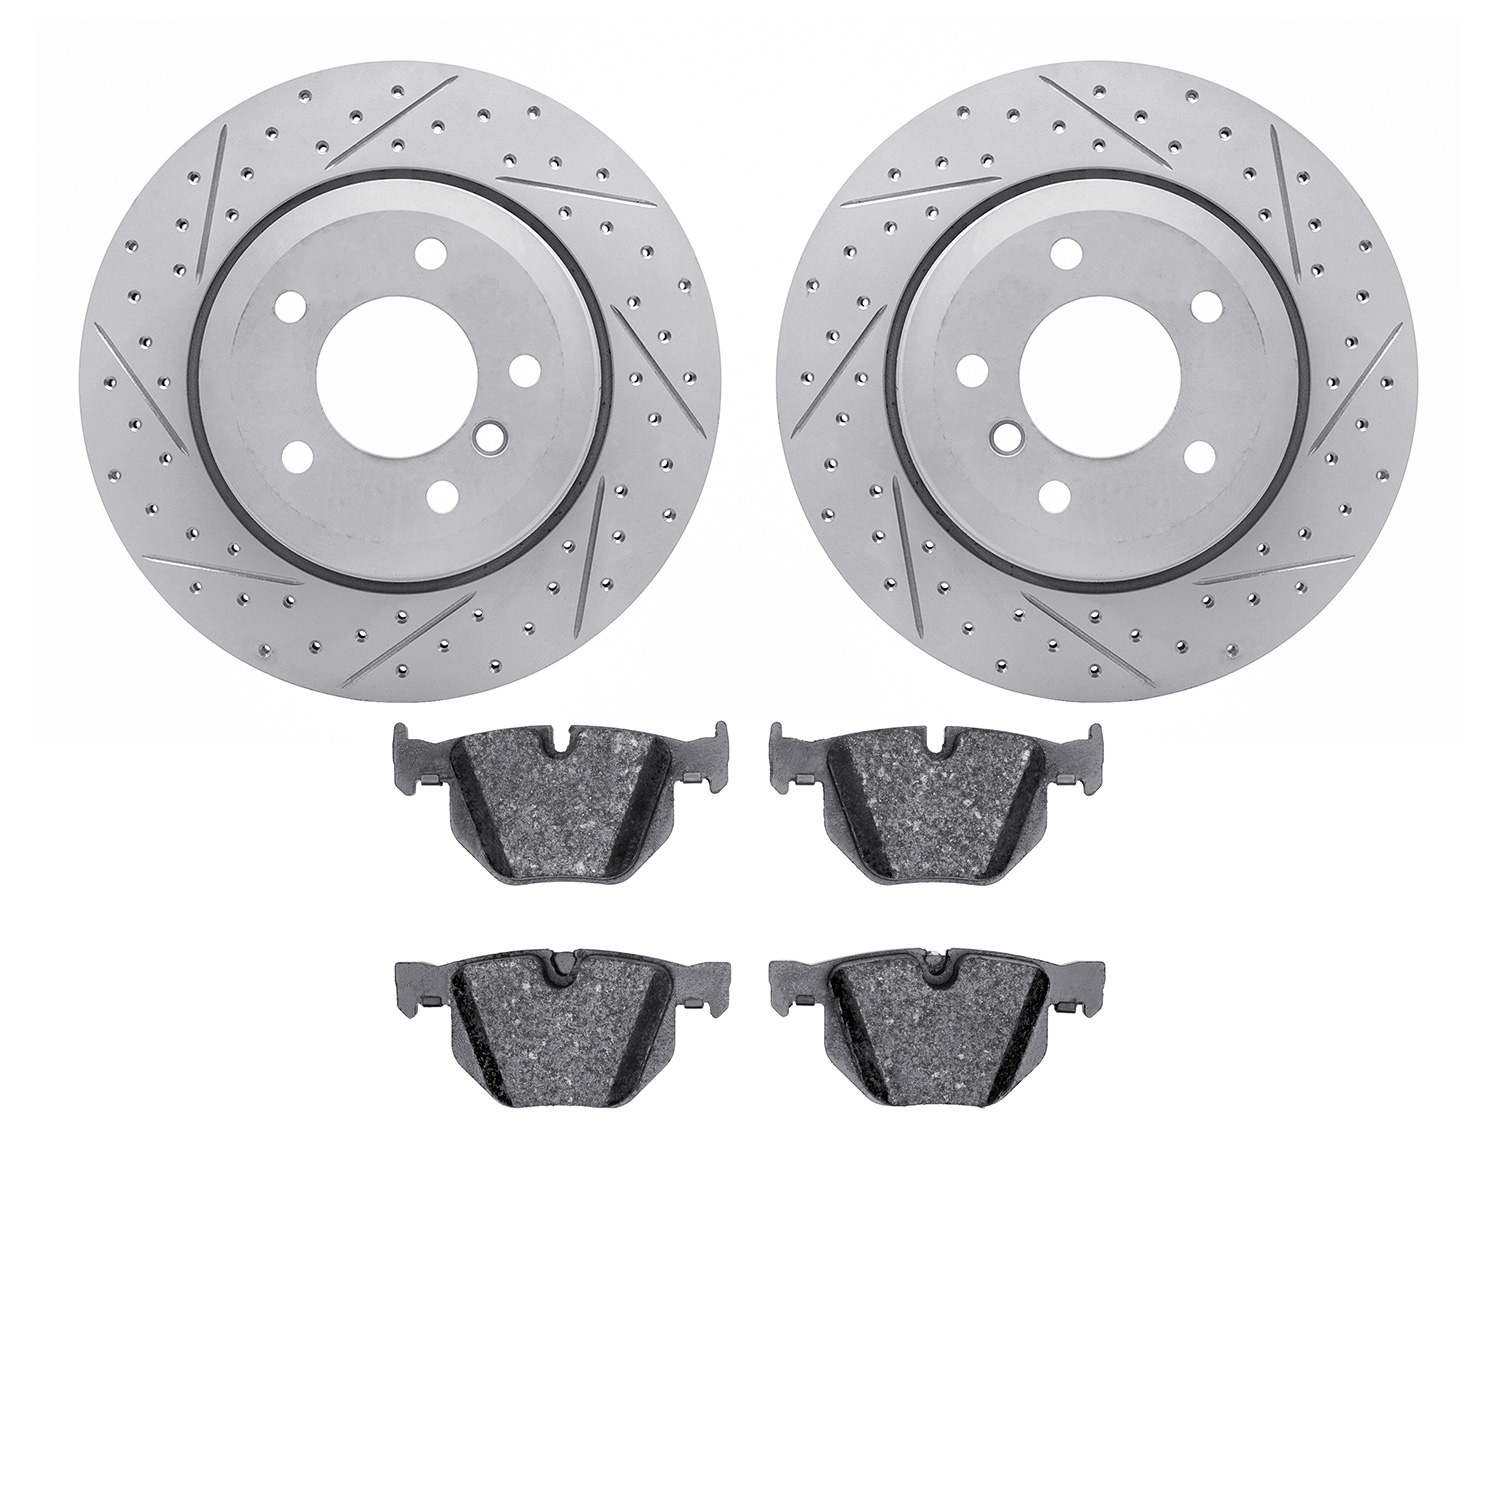 2502-31056 Geoperformance Drilled/Slotted Rotors w/5000 Advanced Brake Pads Kit, 2006-2010 BMW, Position: Rear